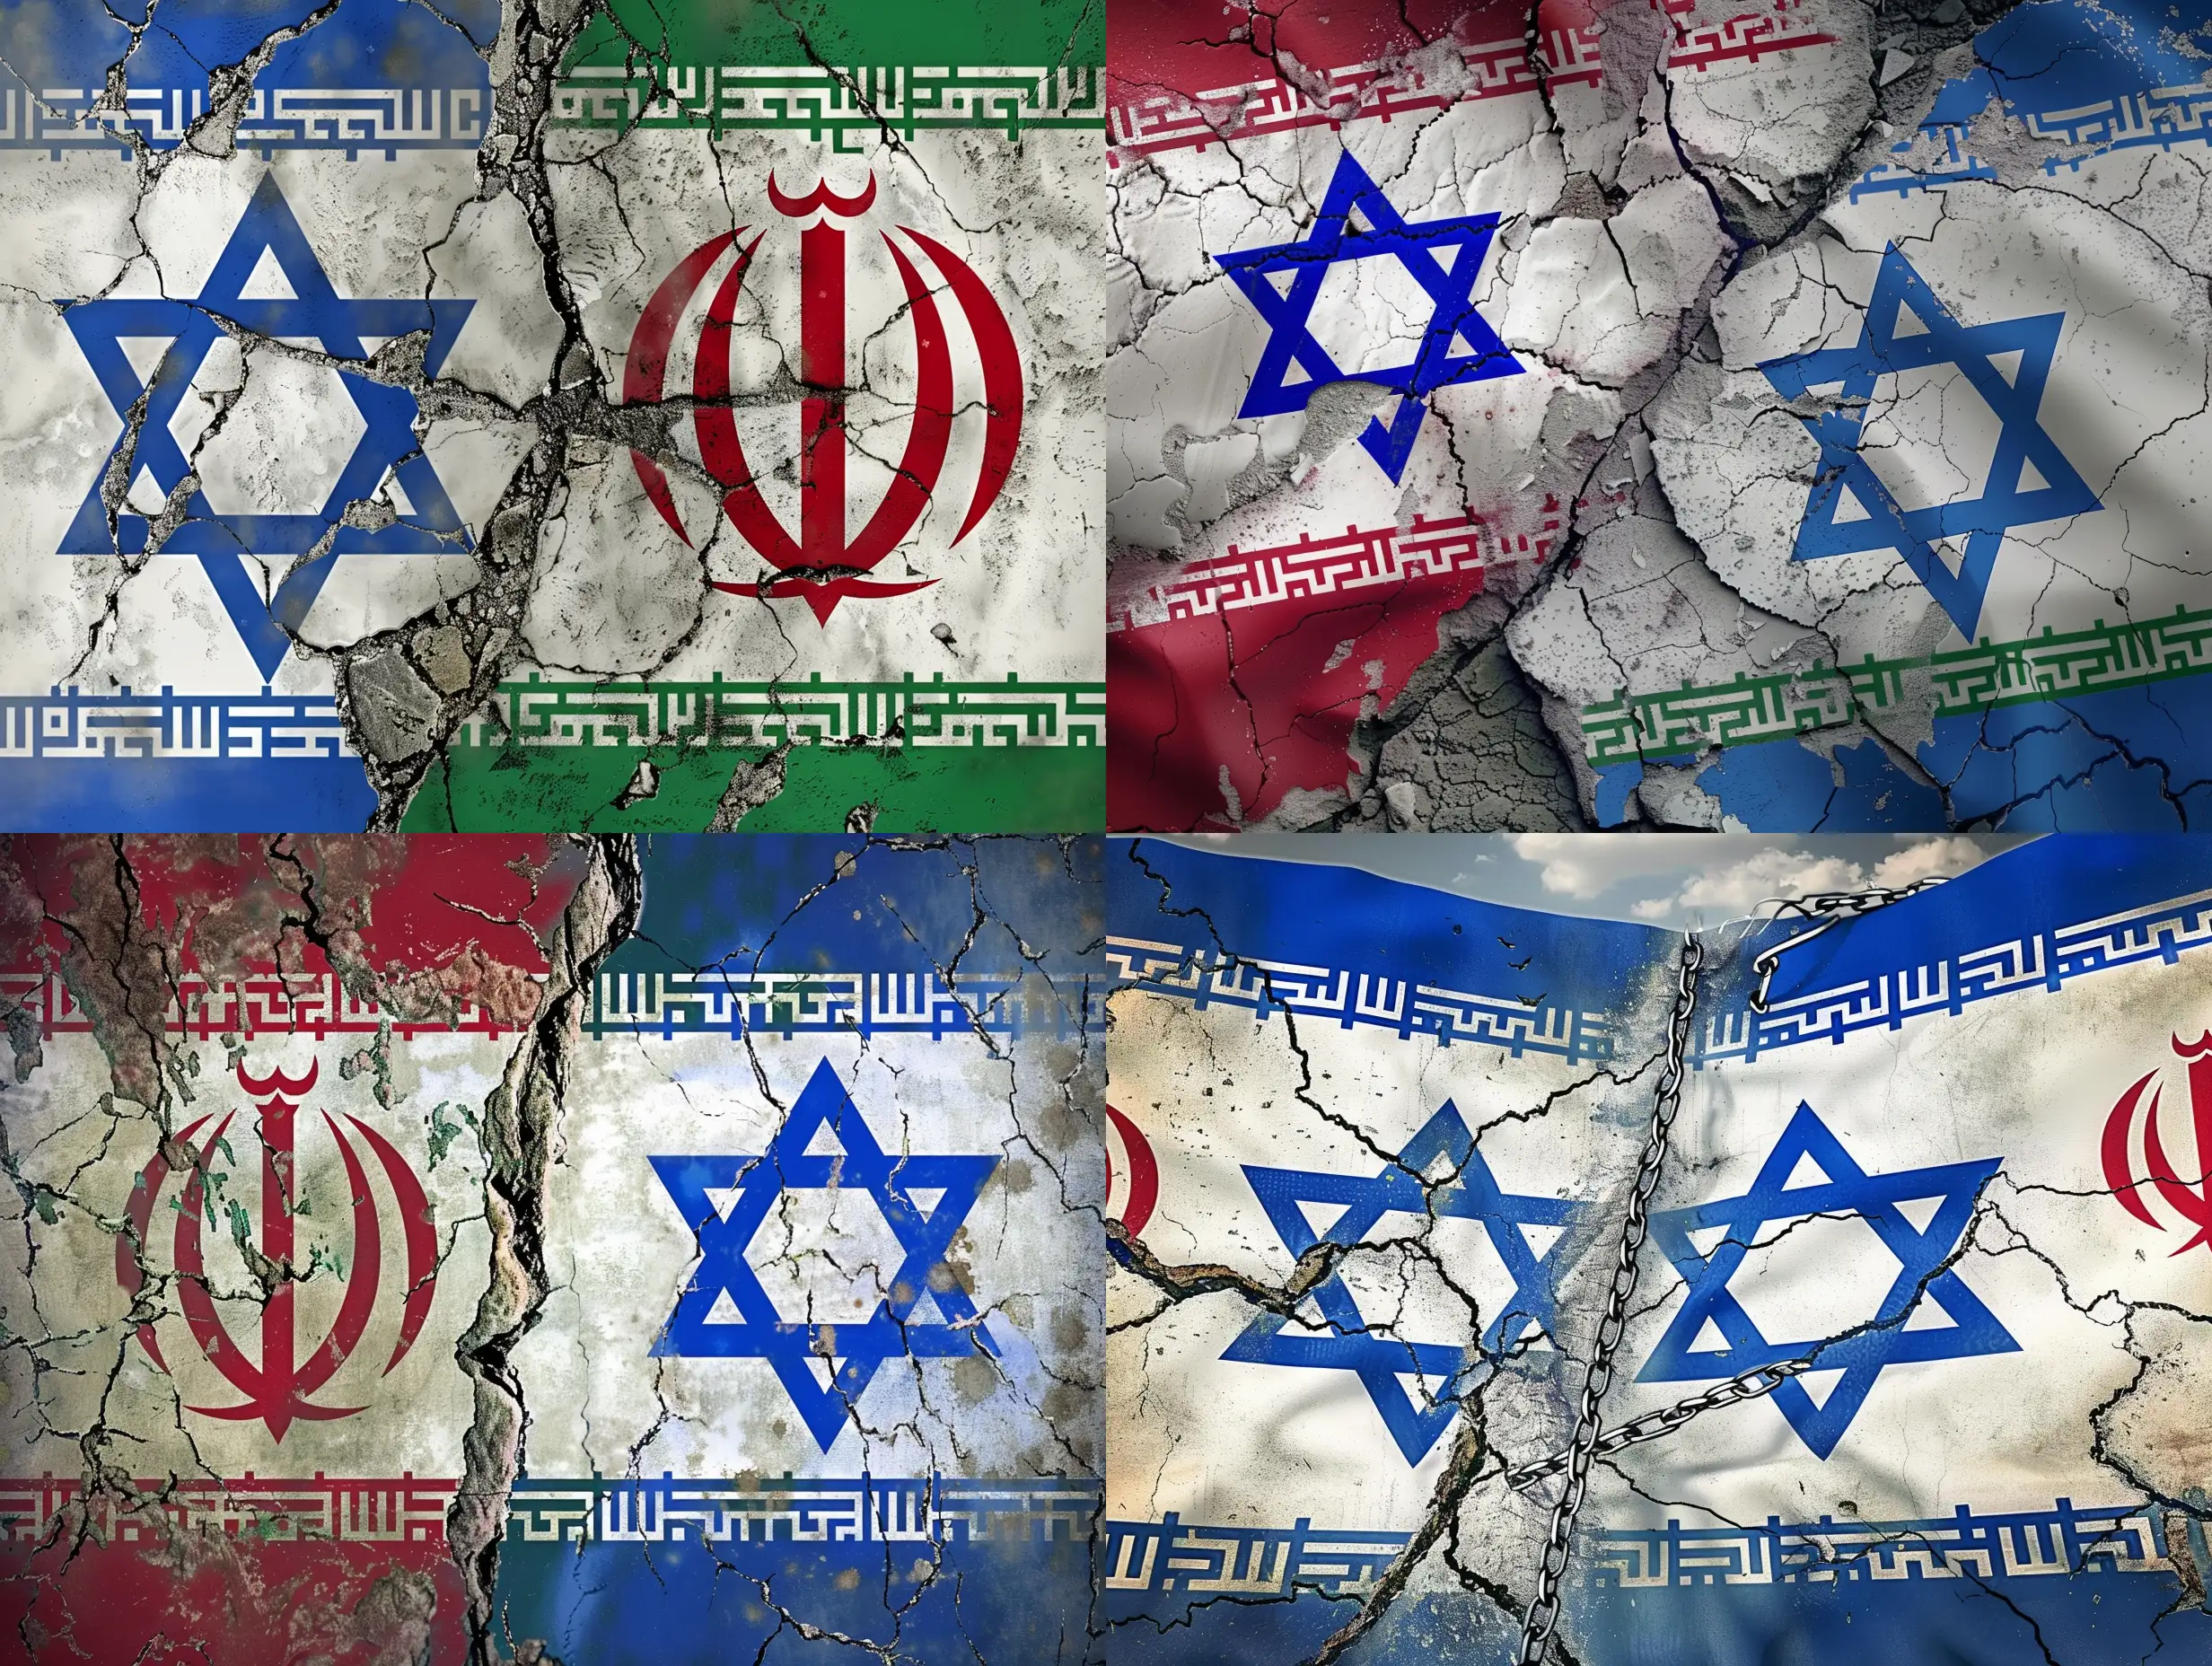 Tensions-Between-Israel-and-Iran-Political-Confrontation-in-the-Middle-East